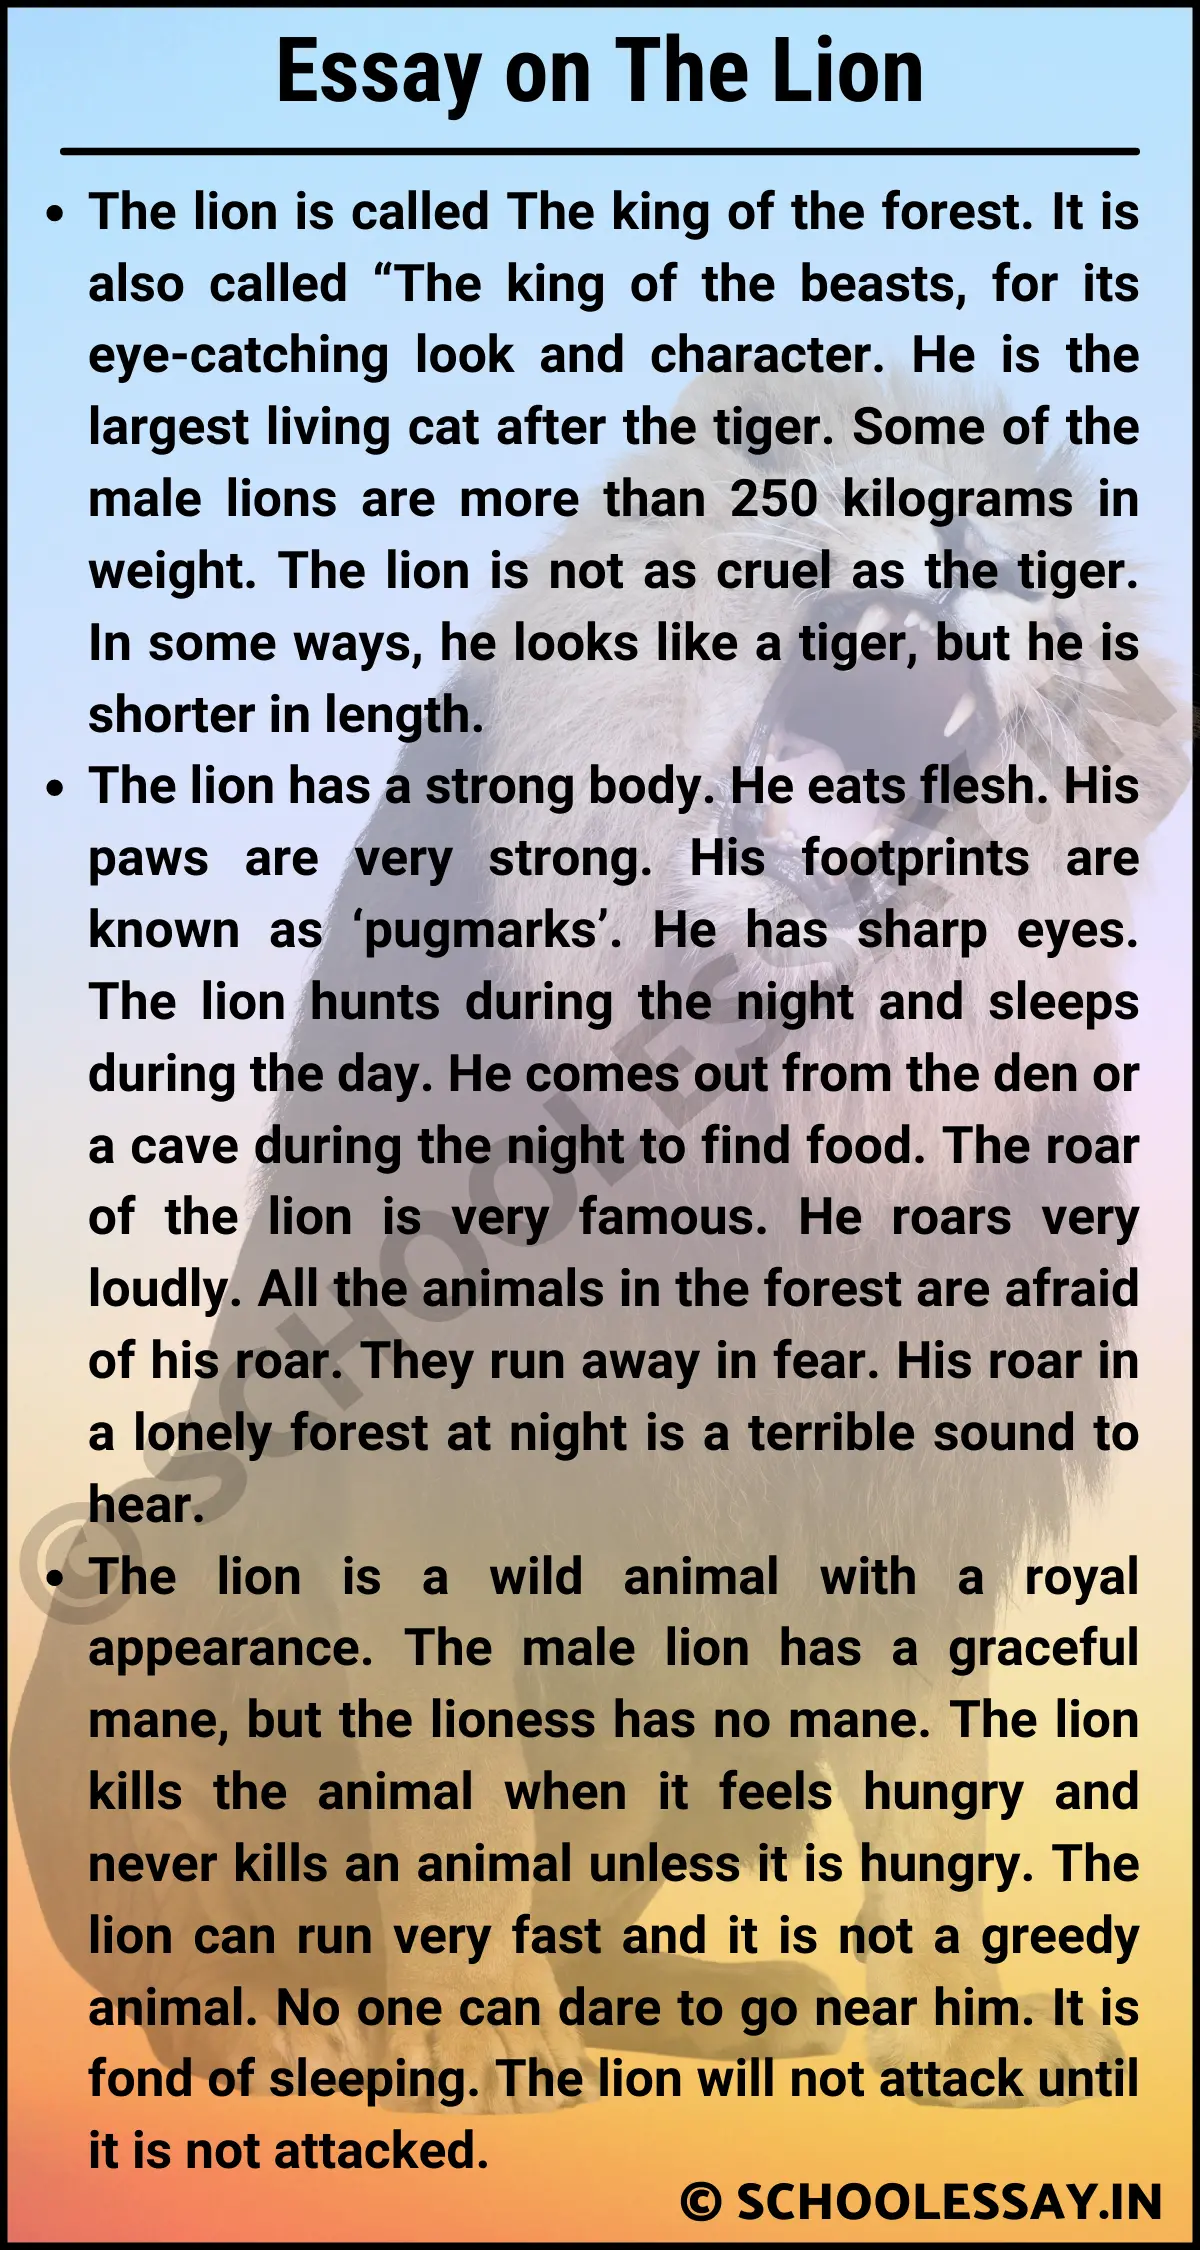 Essay on The Lion